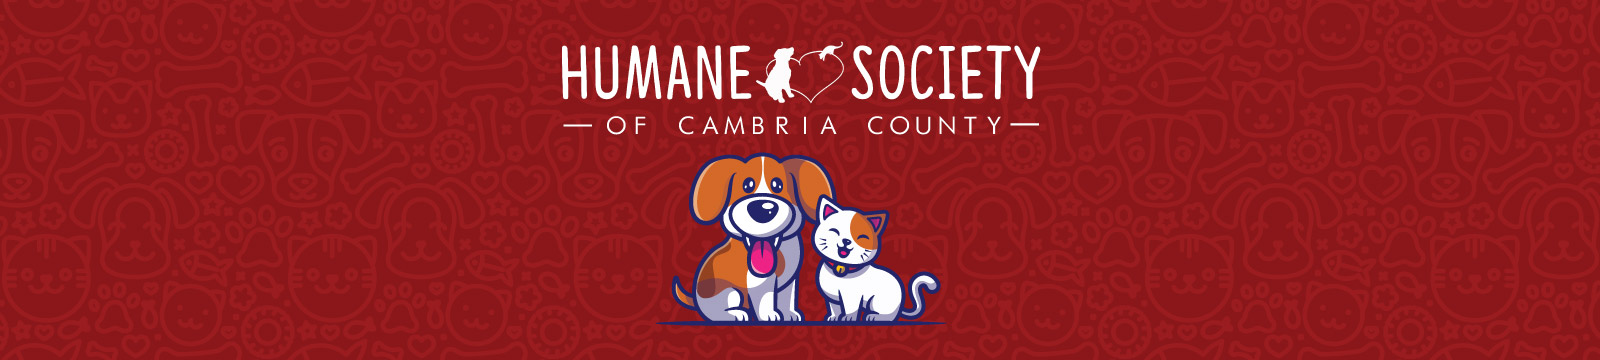 images of Humane Society of Cambria County and cute puppy/kitten